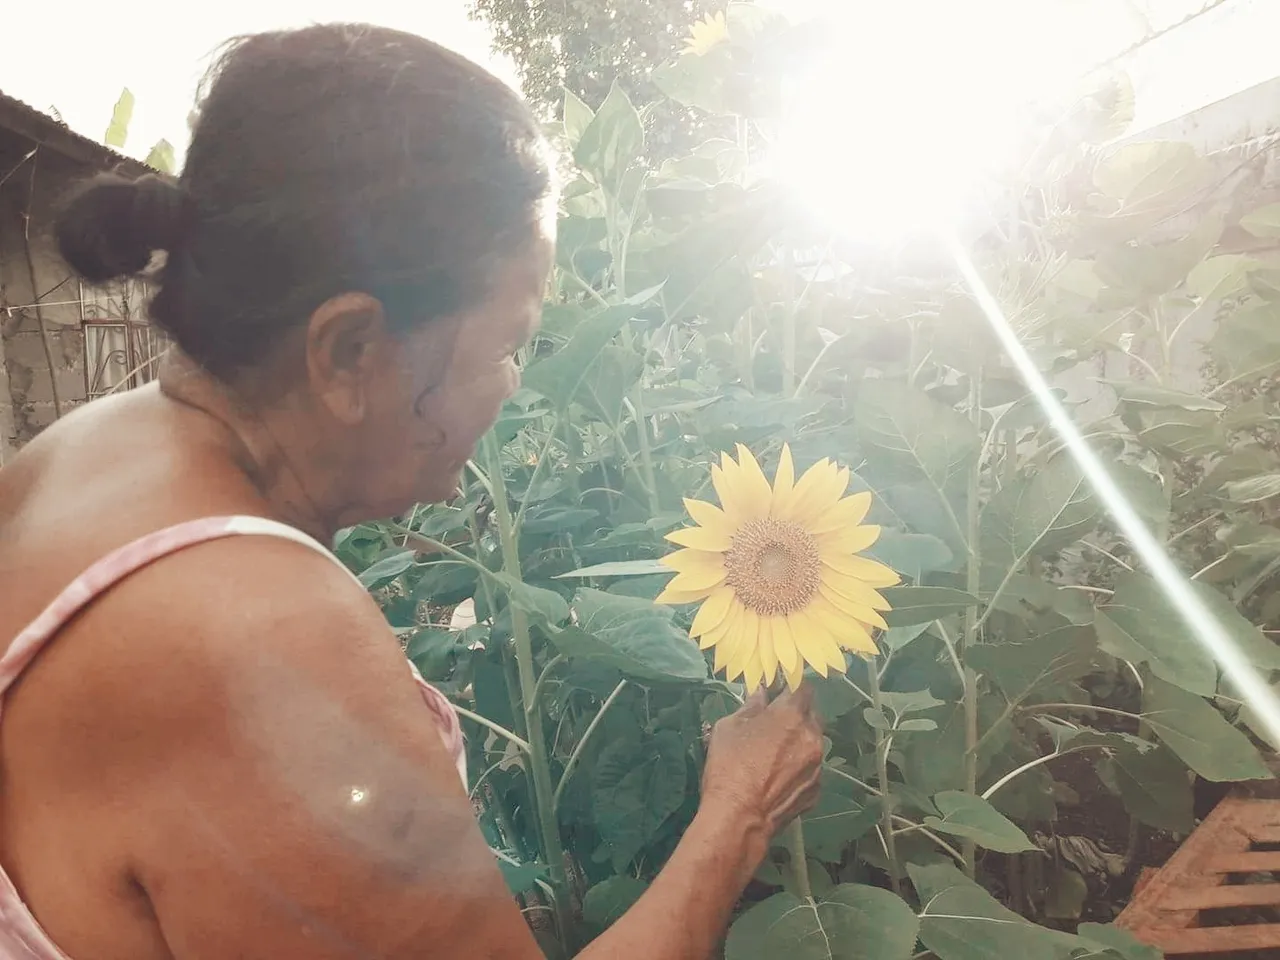 Lola Leonila visiting the sunflowers at our yard.